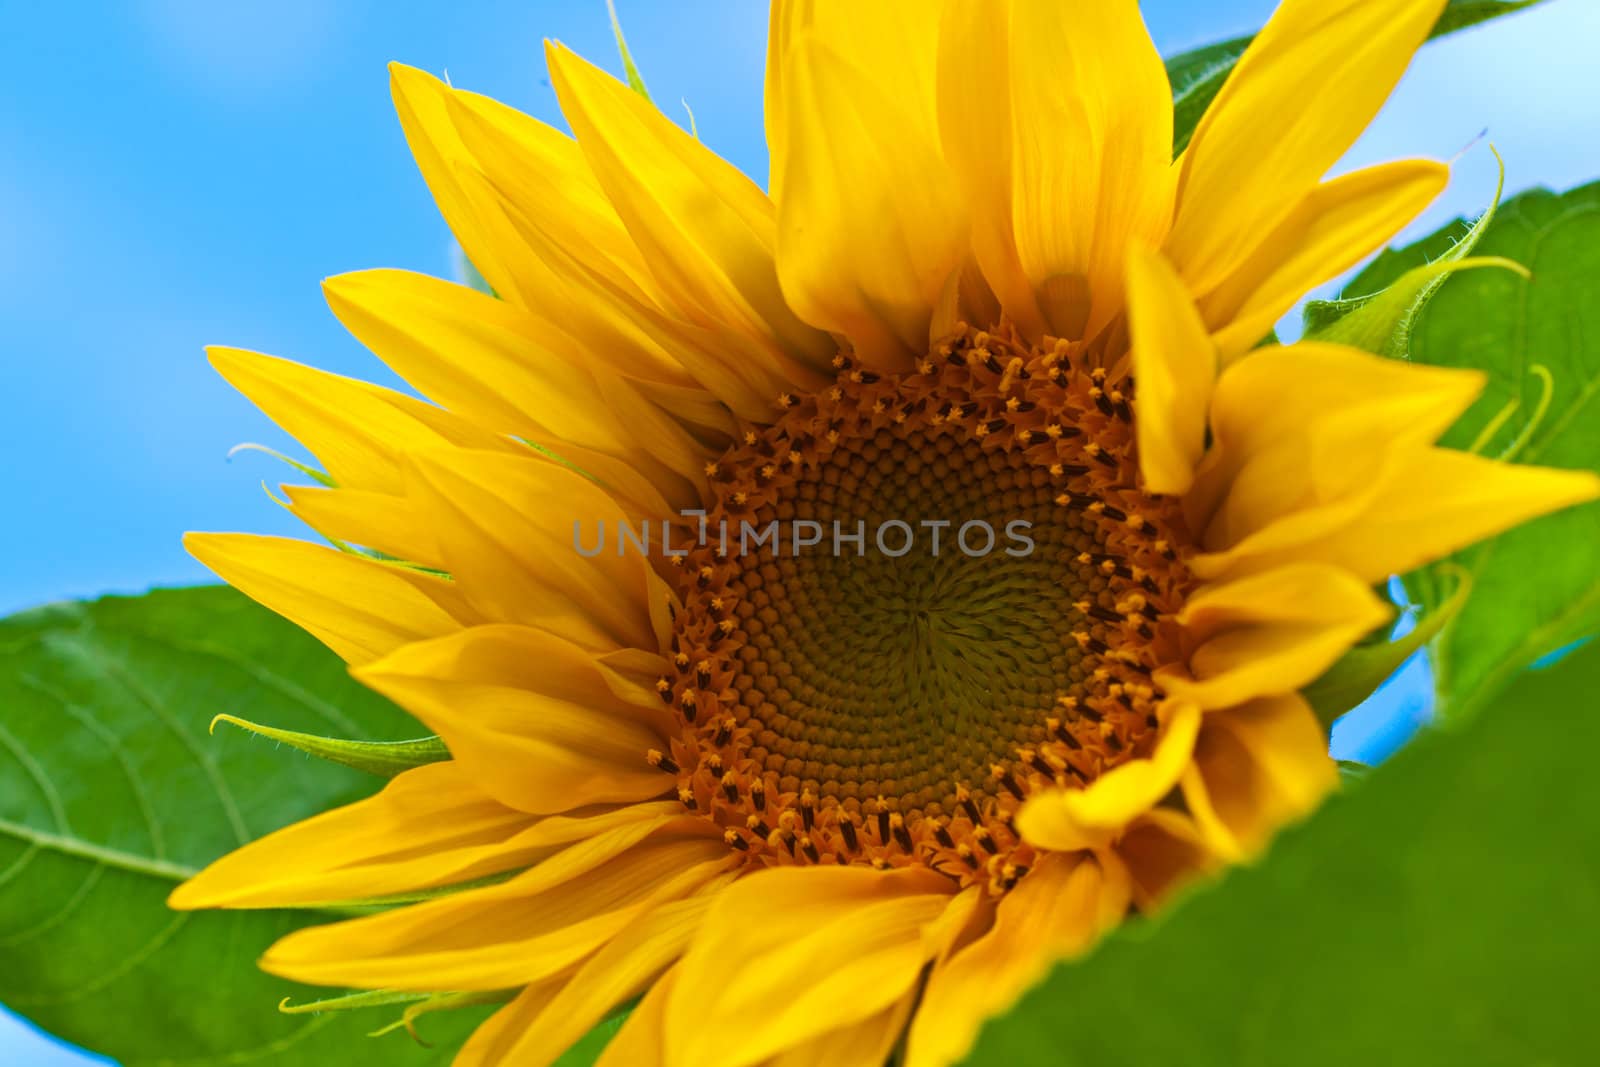 sunflowers with bright yellow petals in the garden